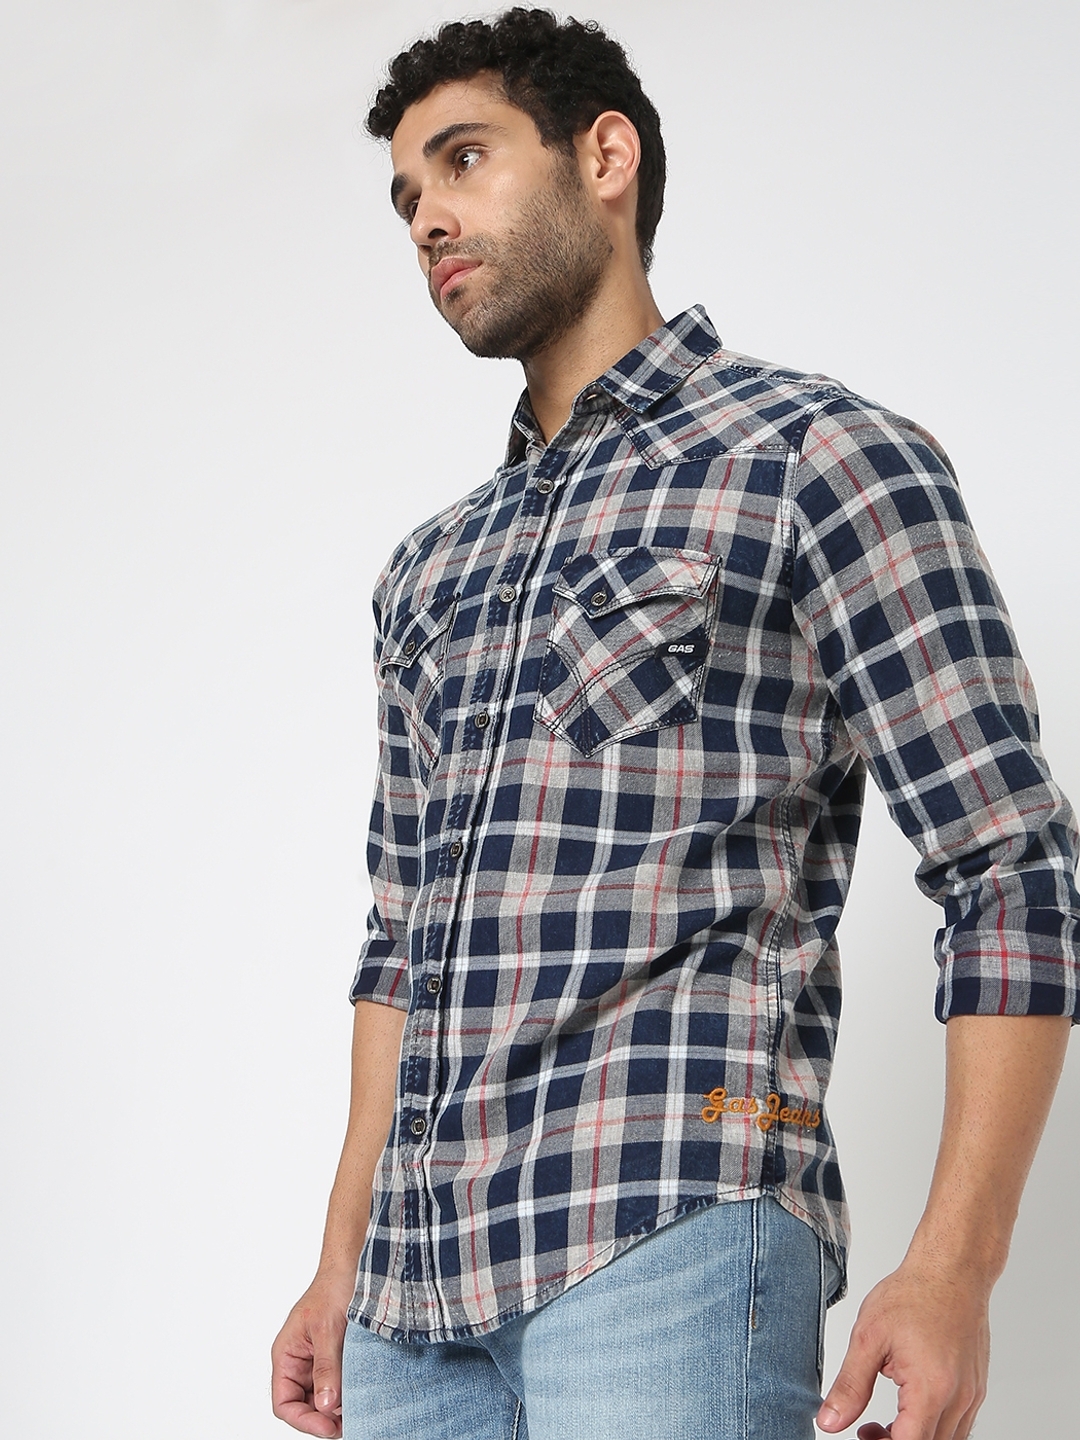 MANGO boys' shirts, compare prices and buy online